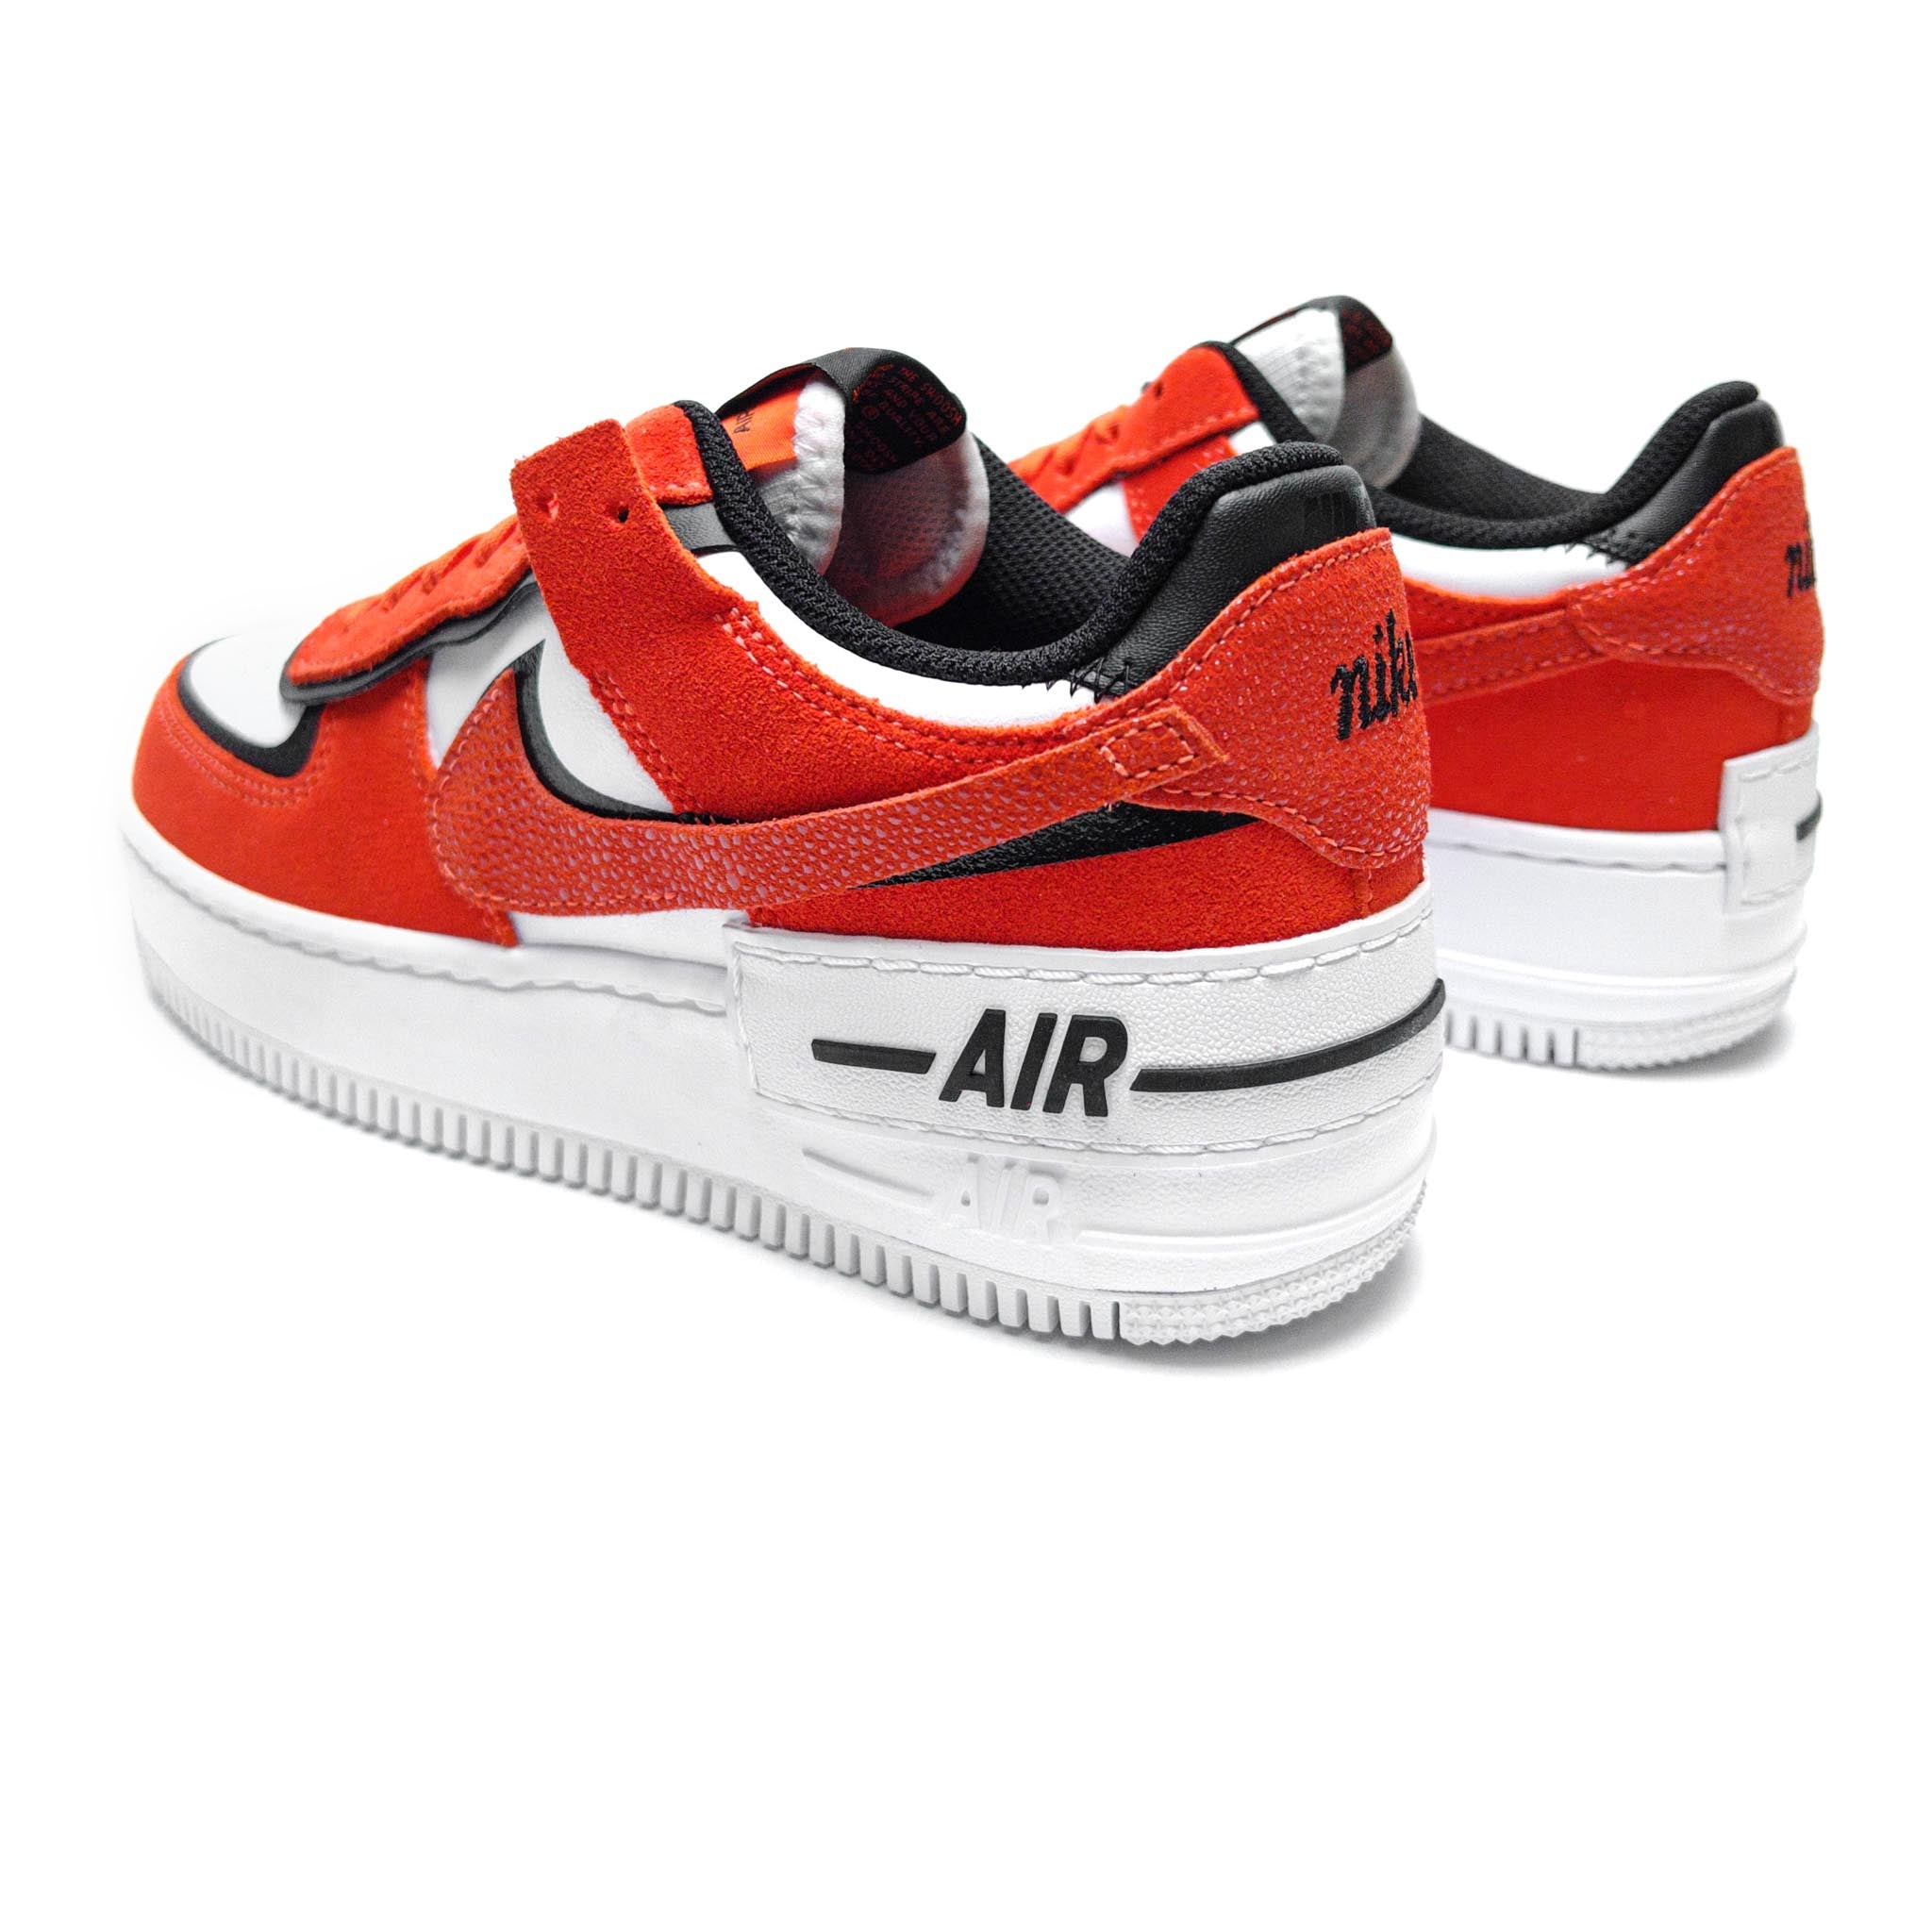 Nike Air Force AF1 Shadow Women's Sneaker Shoe Limited Edition Orange  DQ8586-800 